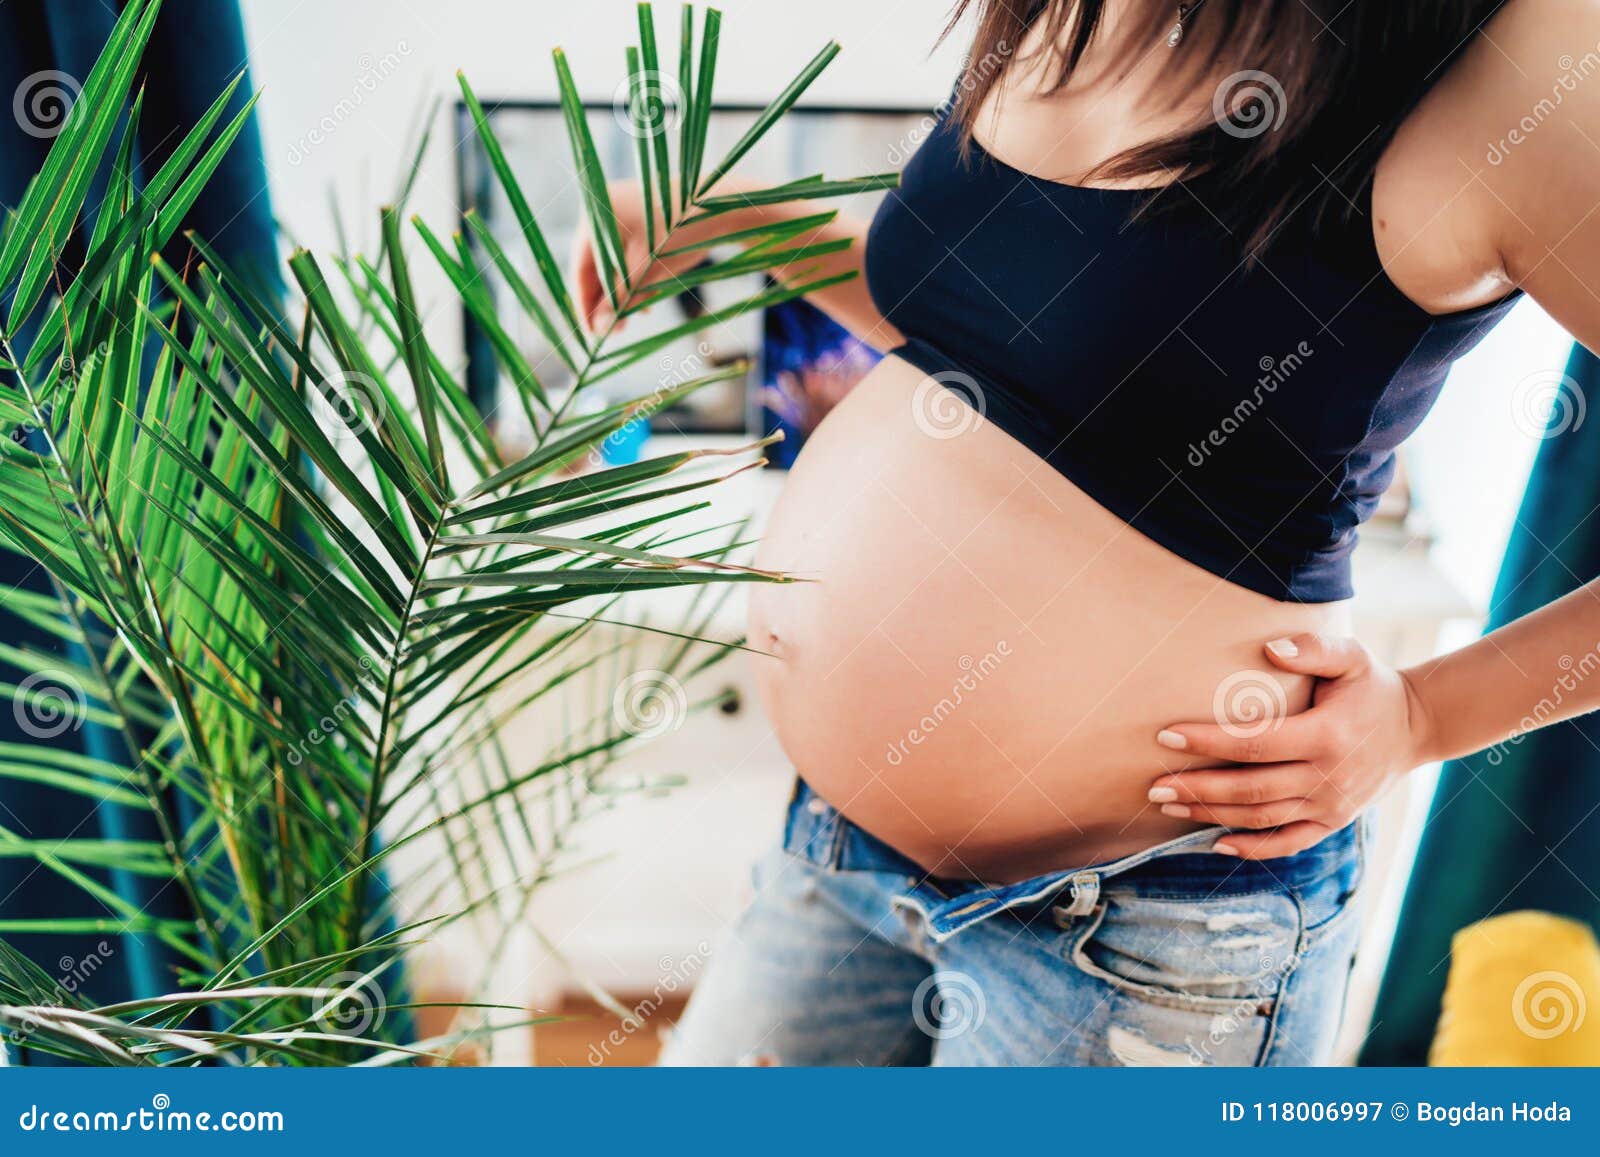 close up details of pregnant woman in new home - concept of pregnancy, maternity and motherhood health care, gynaecology, medicine